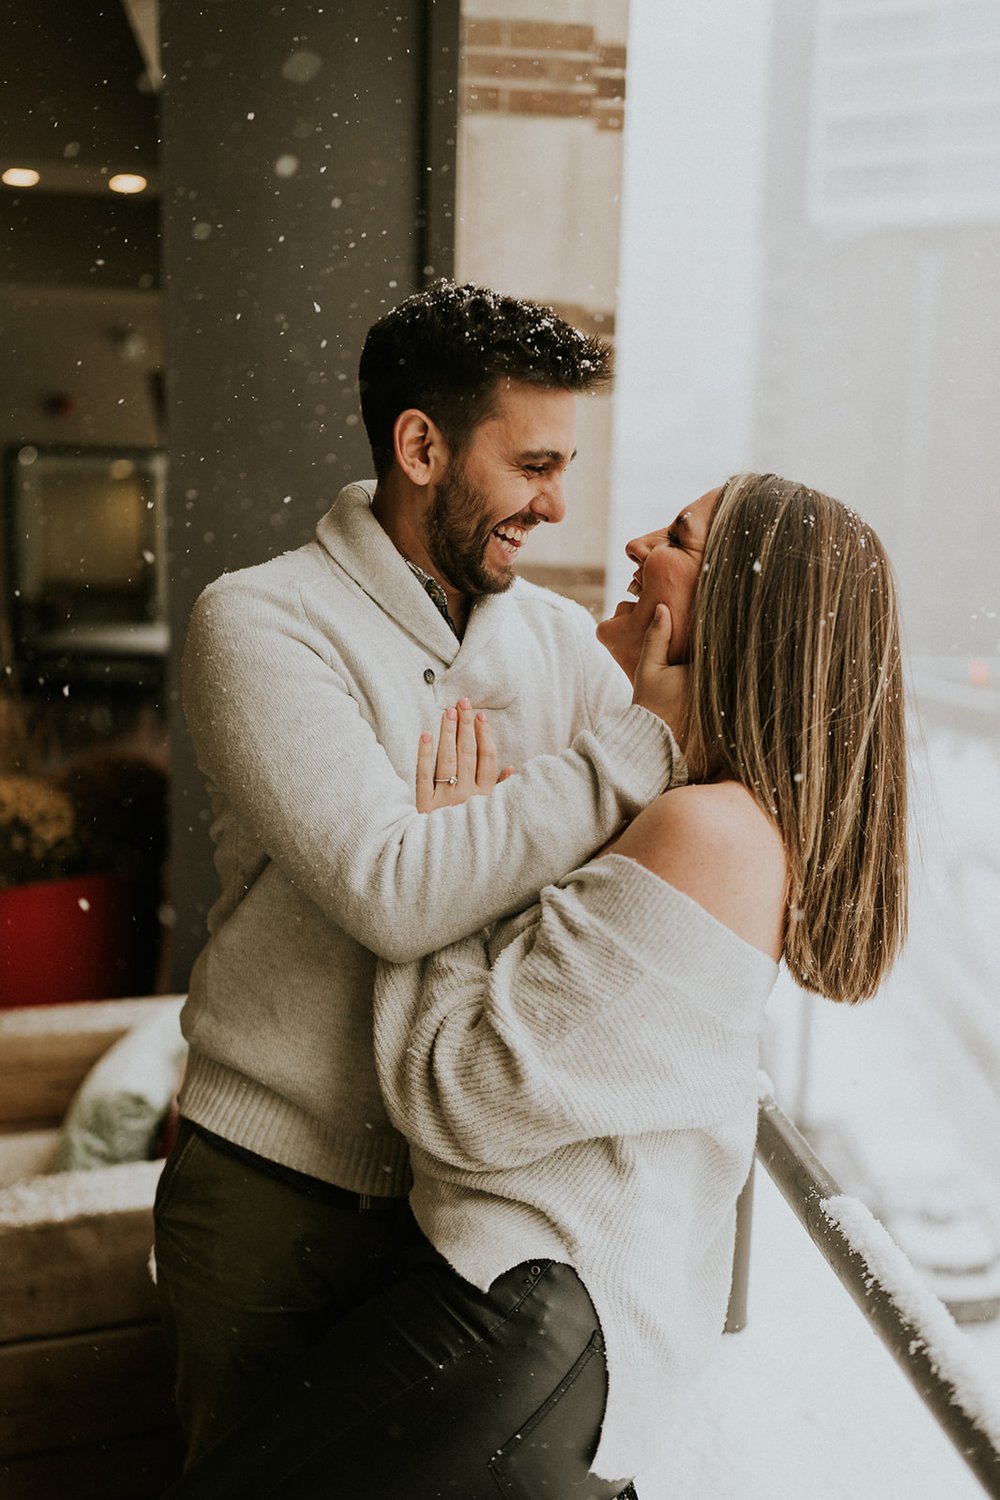  Couple embraces in the snow, wearing warm white sweaters. 